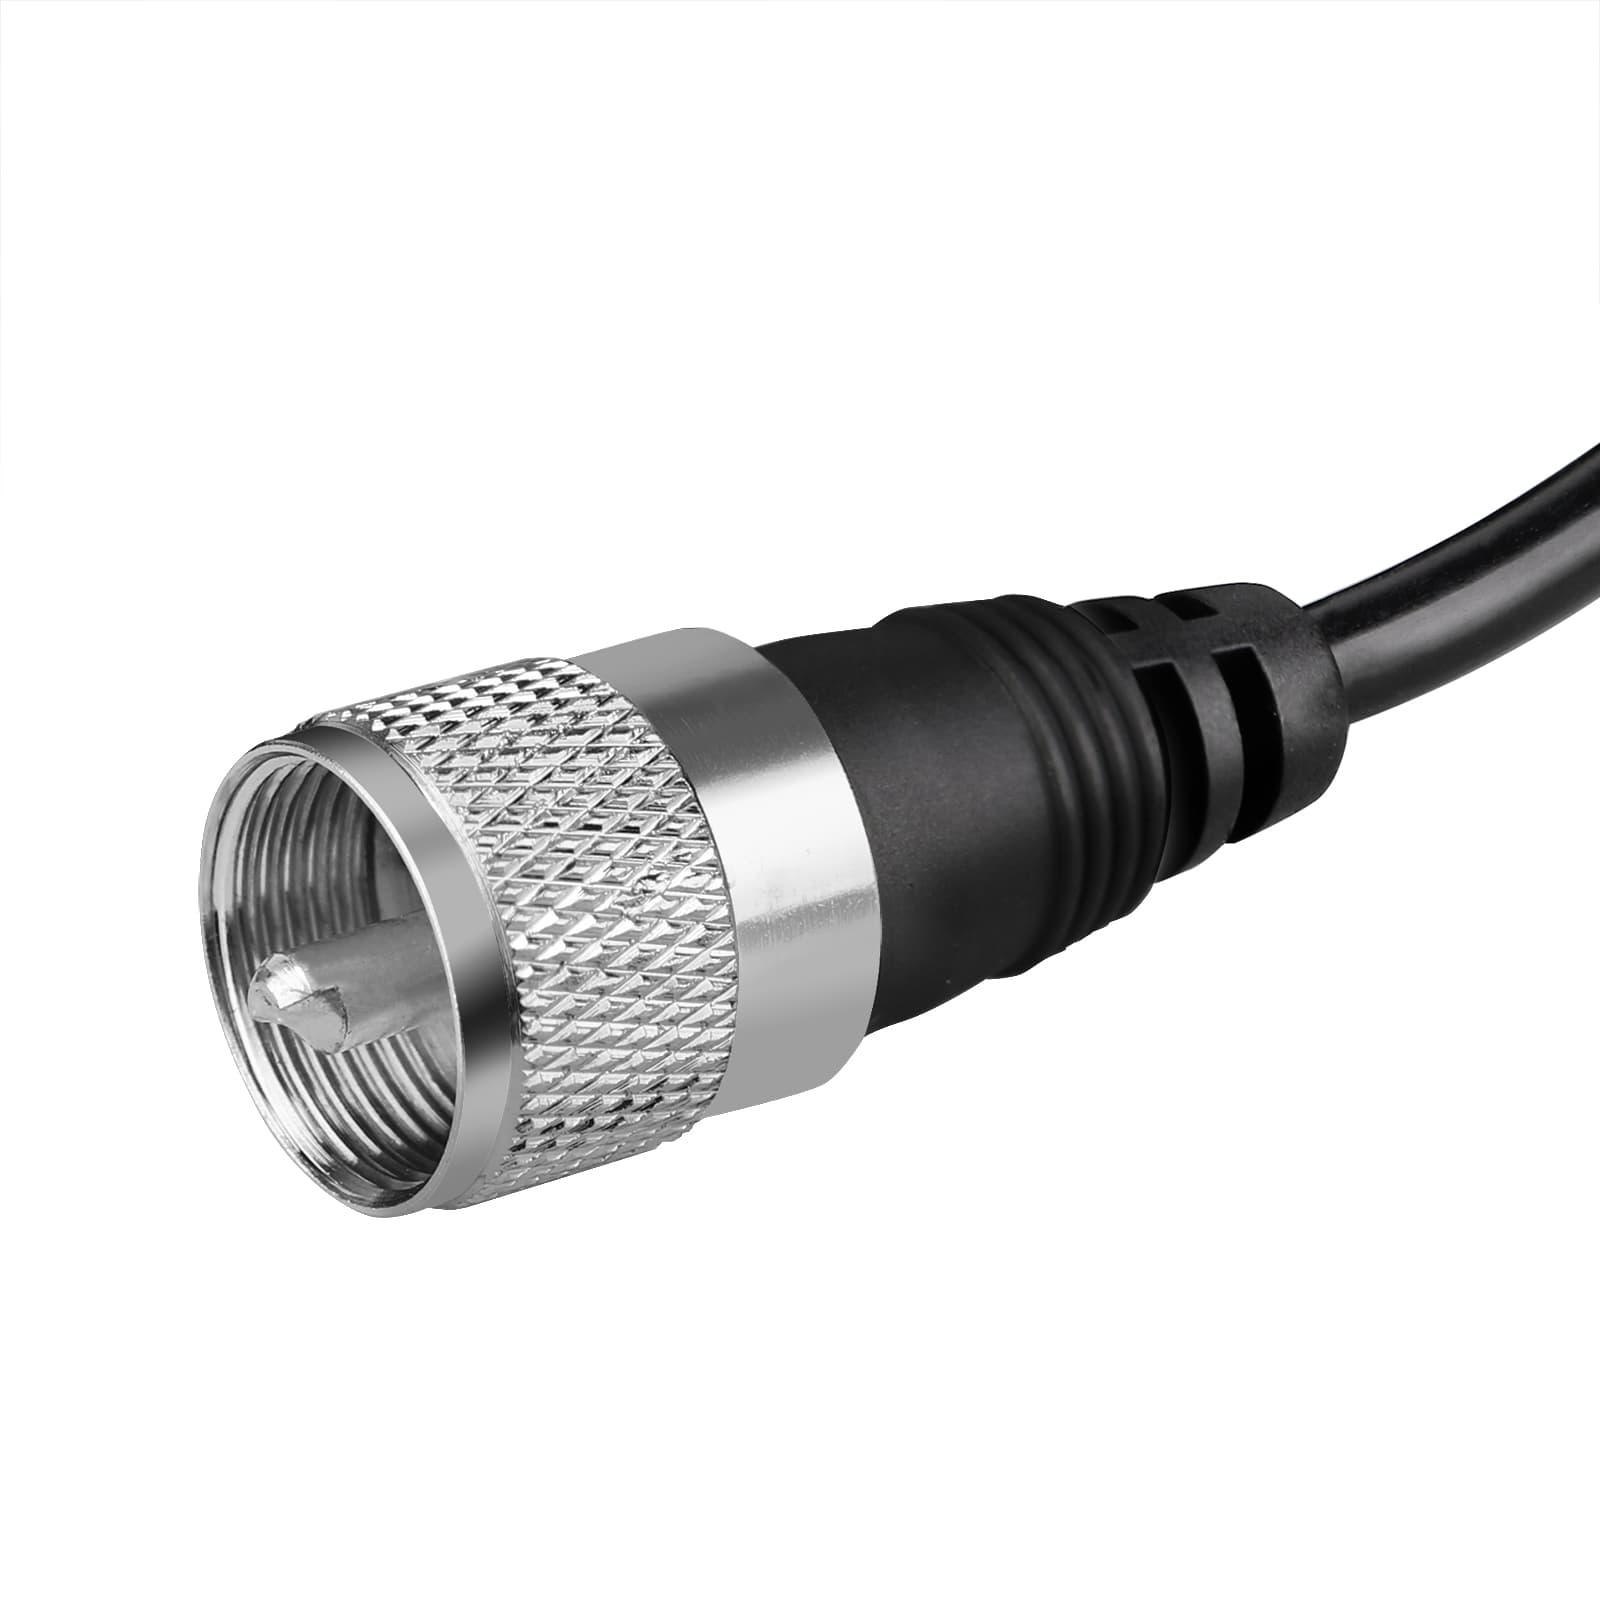 Connector for RG58 Coaxial Cable